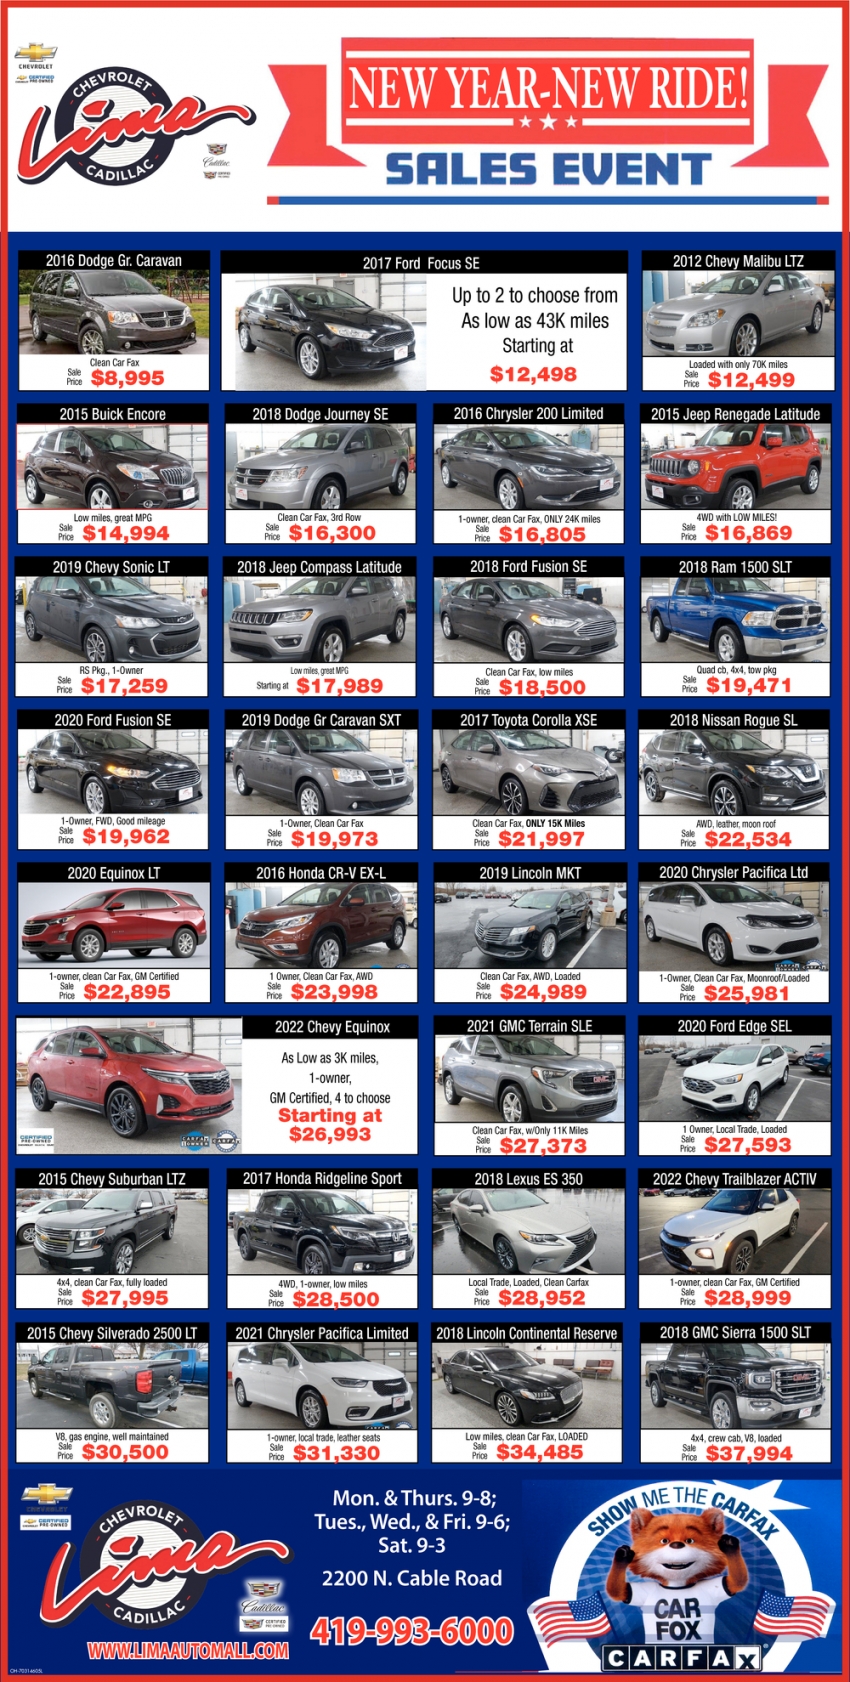 New Year-New Ride Sales Event